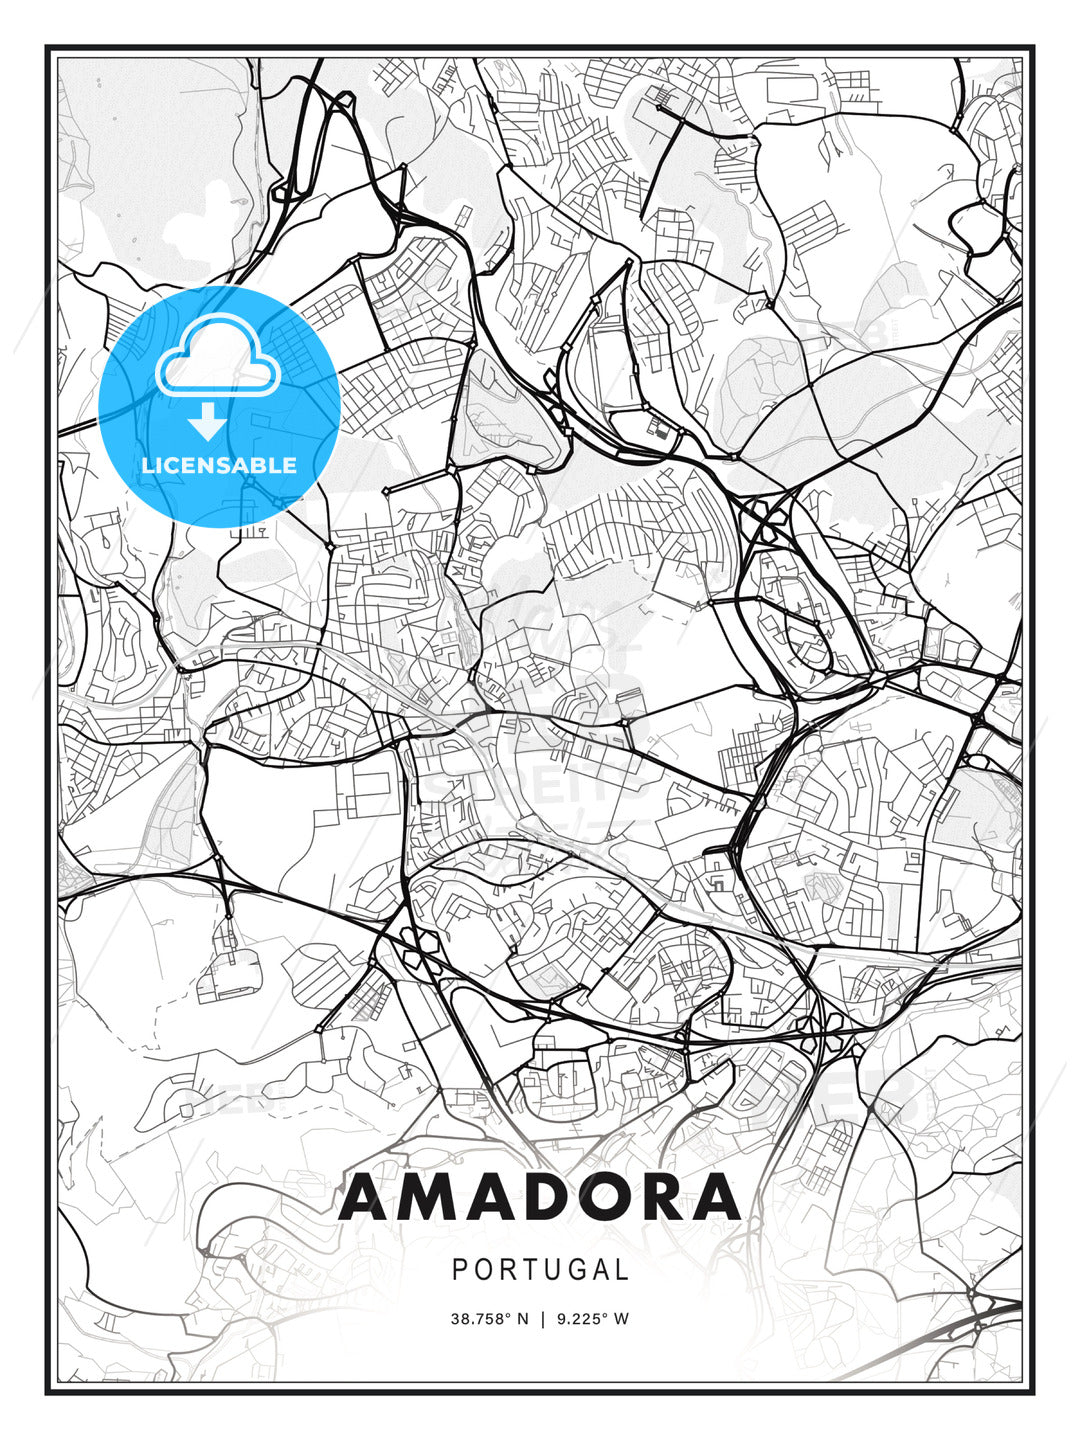 Amadora, Portugal, Modern Print Template in Various Formats - HEBSTREITS Sketches